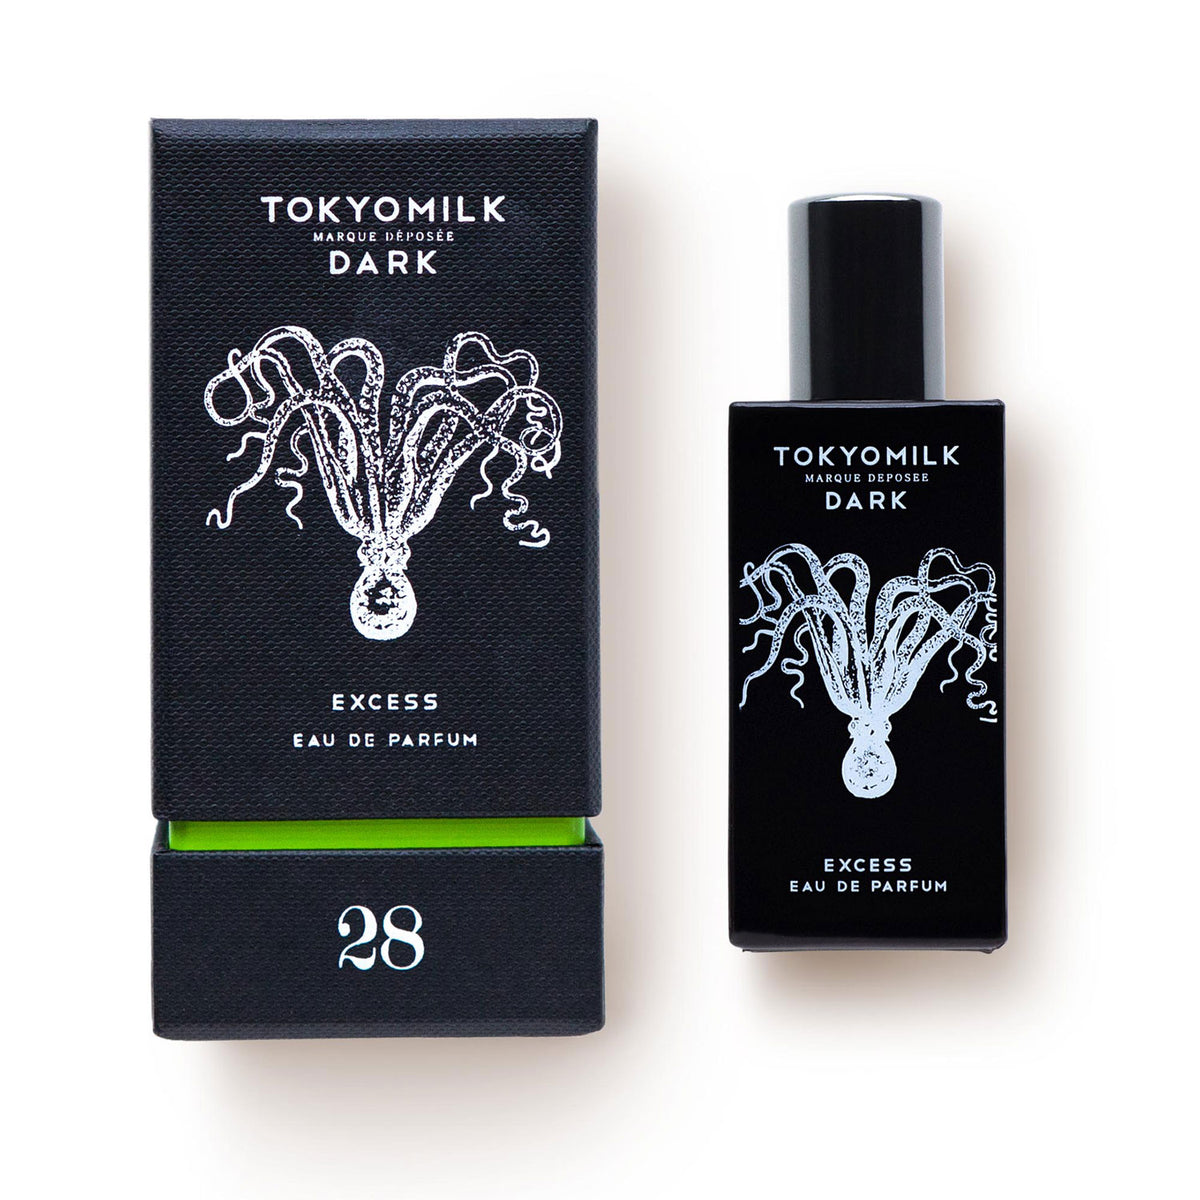 A black and white image of Margot Elena's TokyoMilk Dark Excess No. 28 Eau de Parfum packaging and bottle, both featuring a stylized jellyfish design. The text includes the brand and product name "Excess Eau de Parfum.